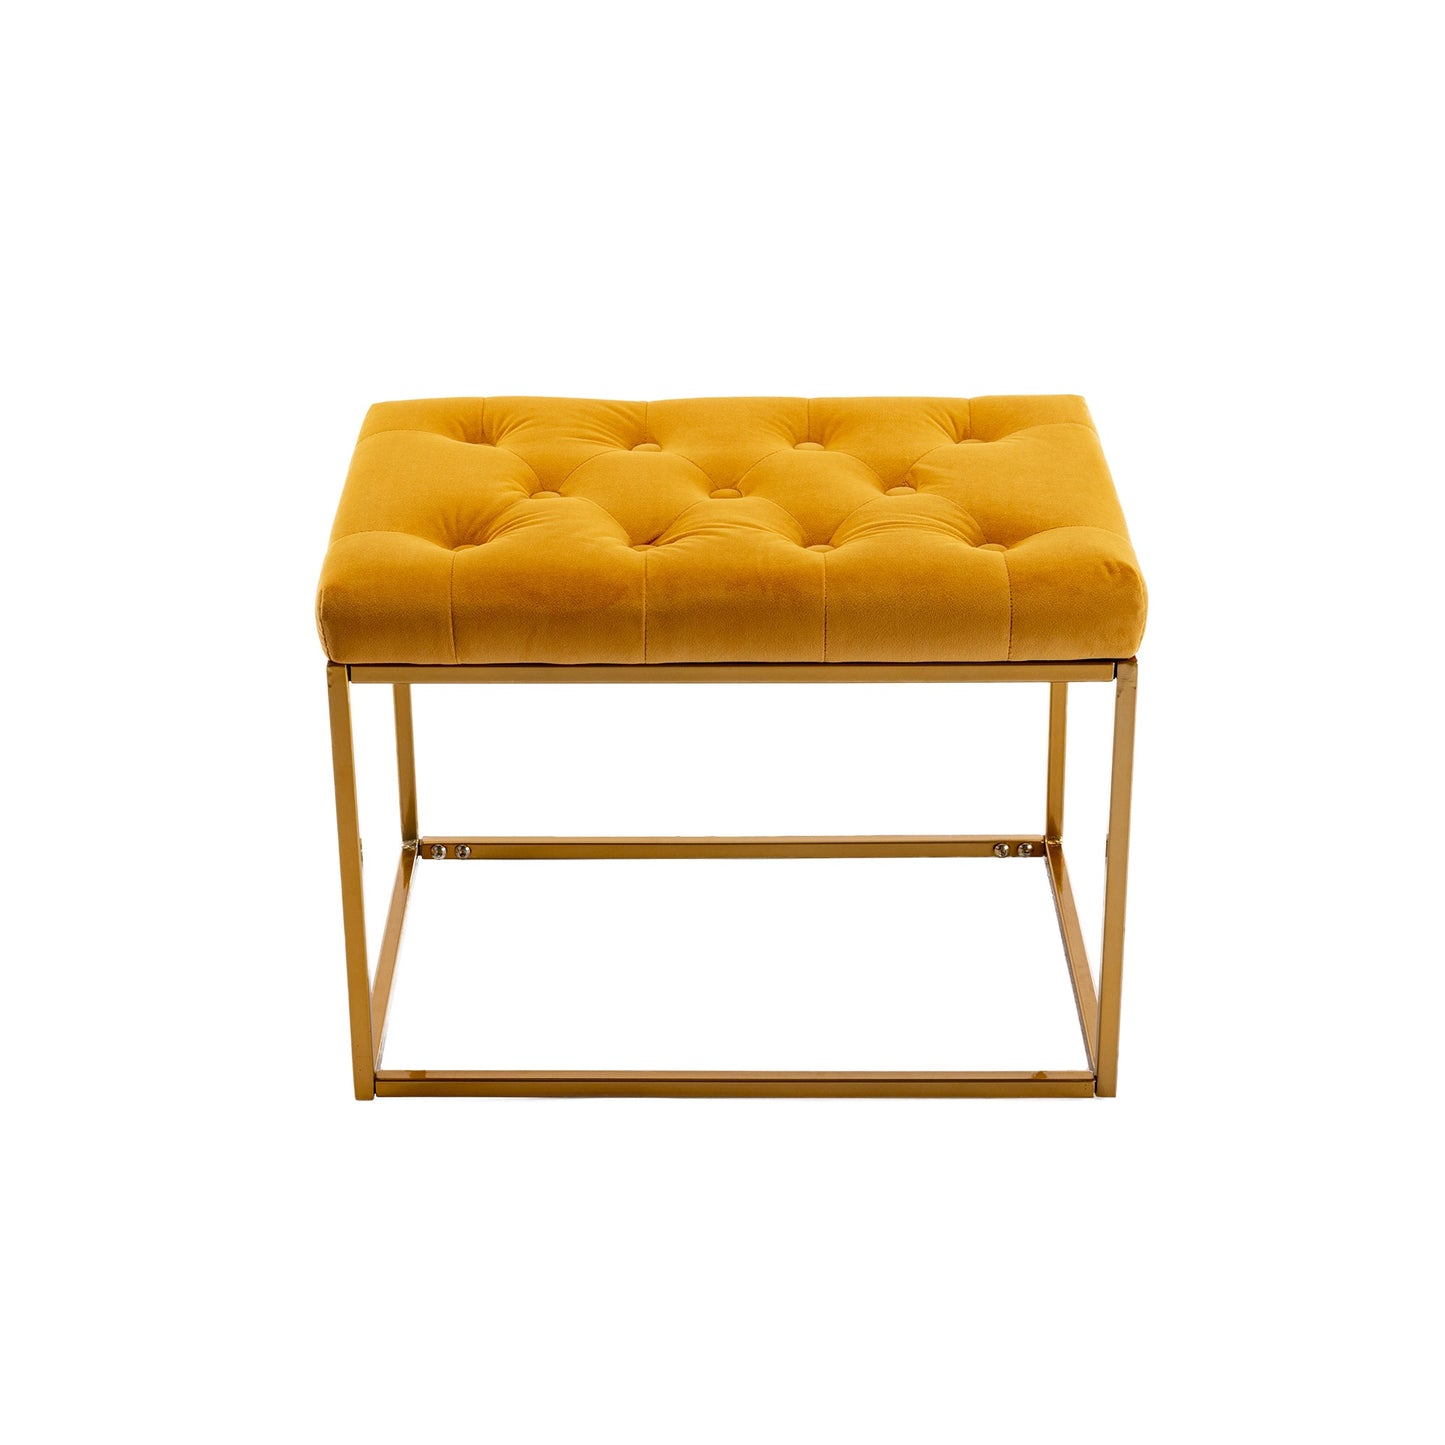 COOLMORE Living Room Tufted Ottoman Yellow - Demine Essentials